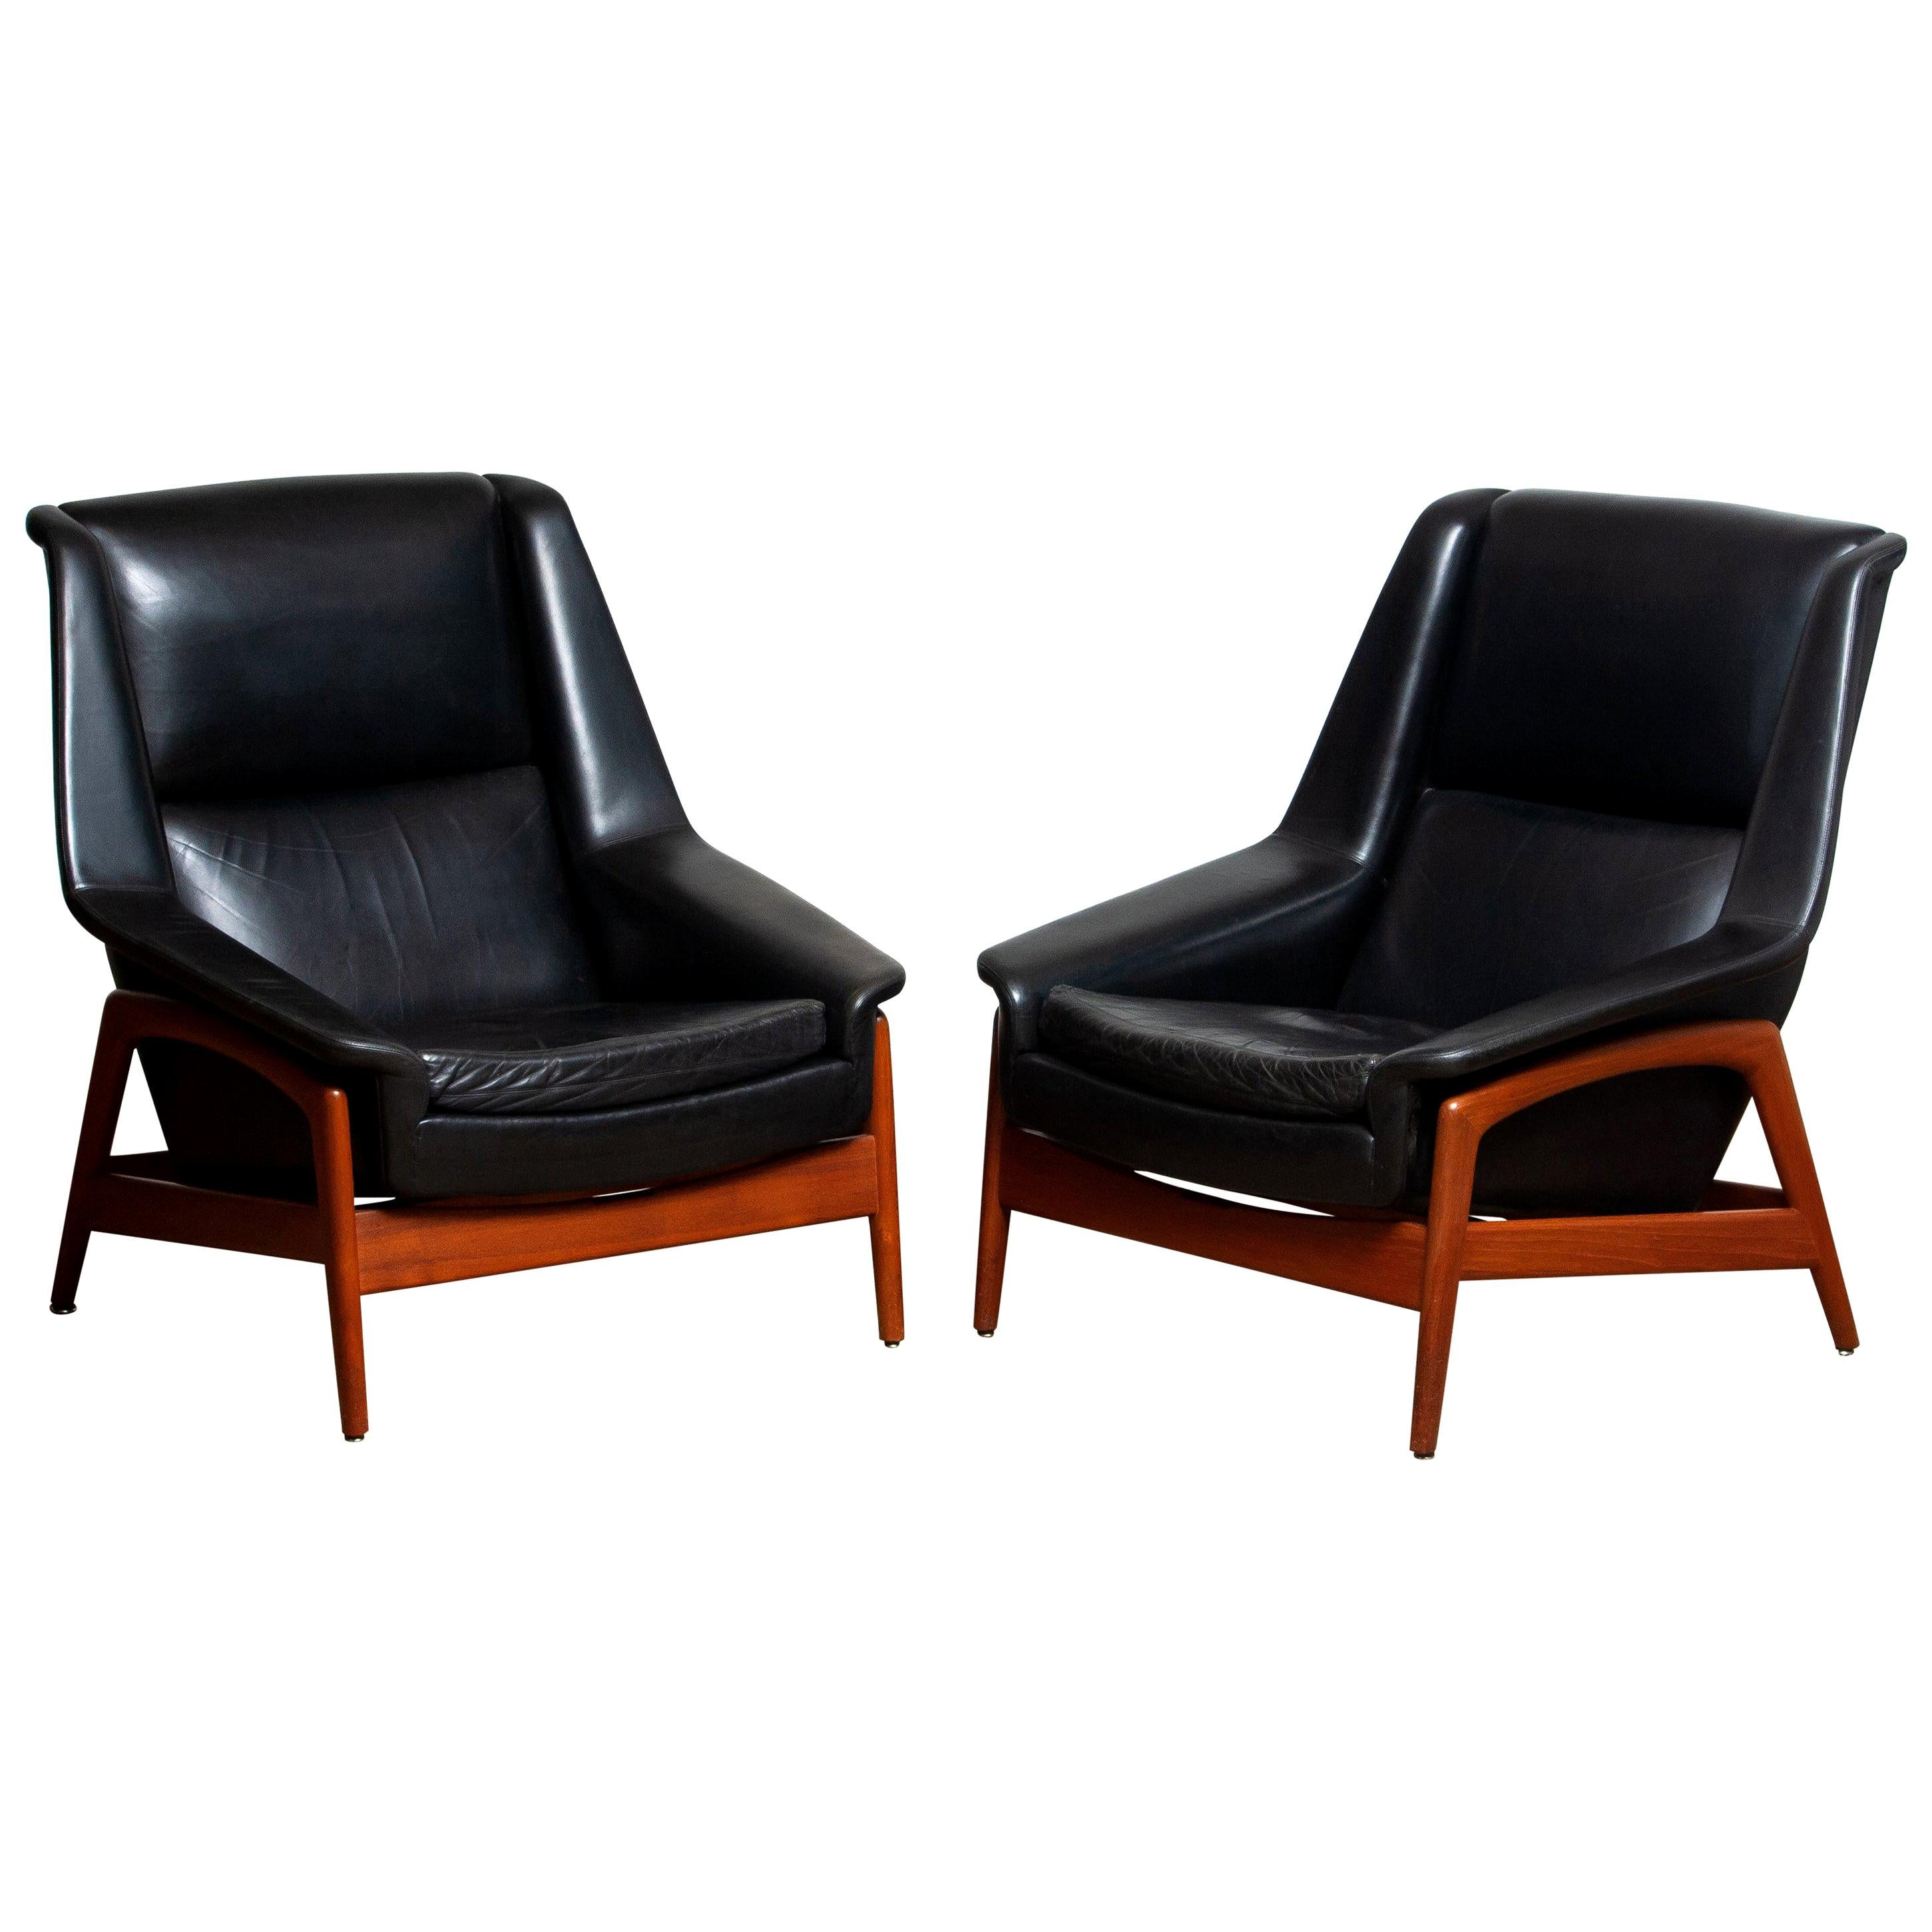 Scandinavian Modern 1960s, Pair of Lounge Chairs 'Profil', Folke Ohlsson for DUX in Leather and Teak